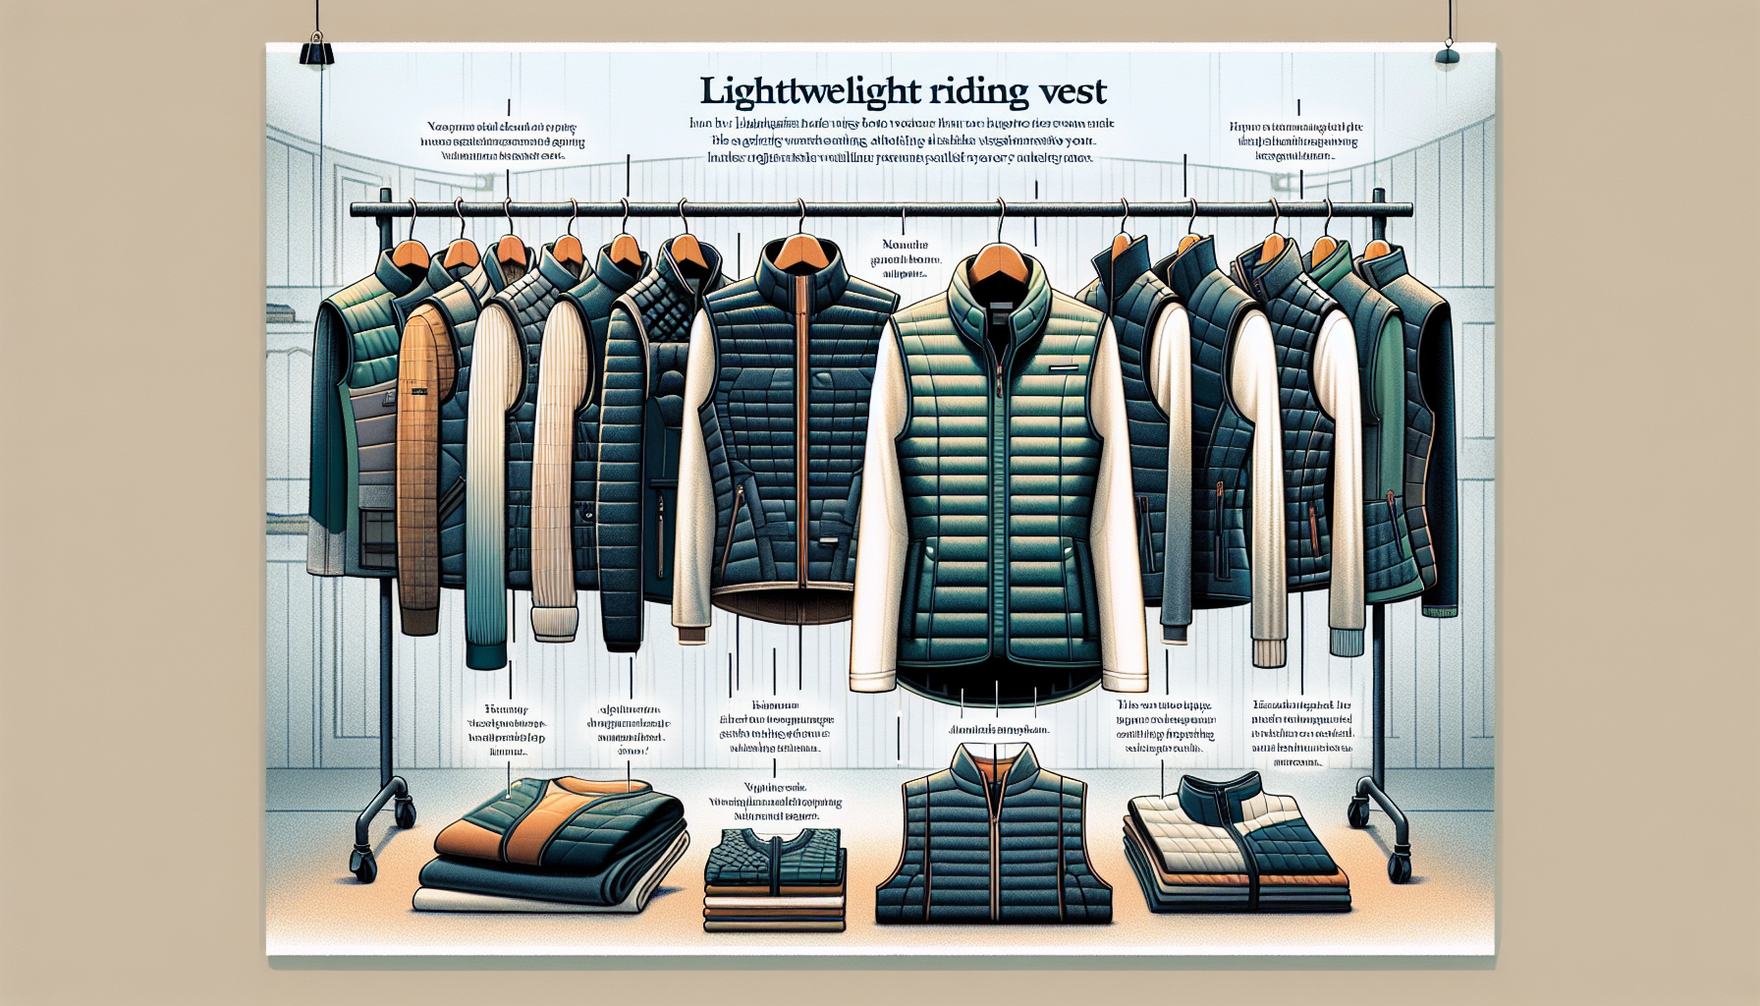 An educational representation of how to utilize lightweight riding vests throughout the year. The image depicts a variety of lightweight riding vests in different styles, colors, and materials hanging